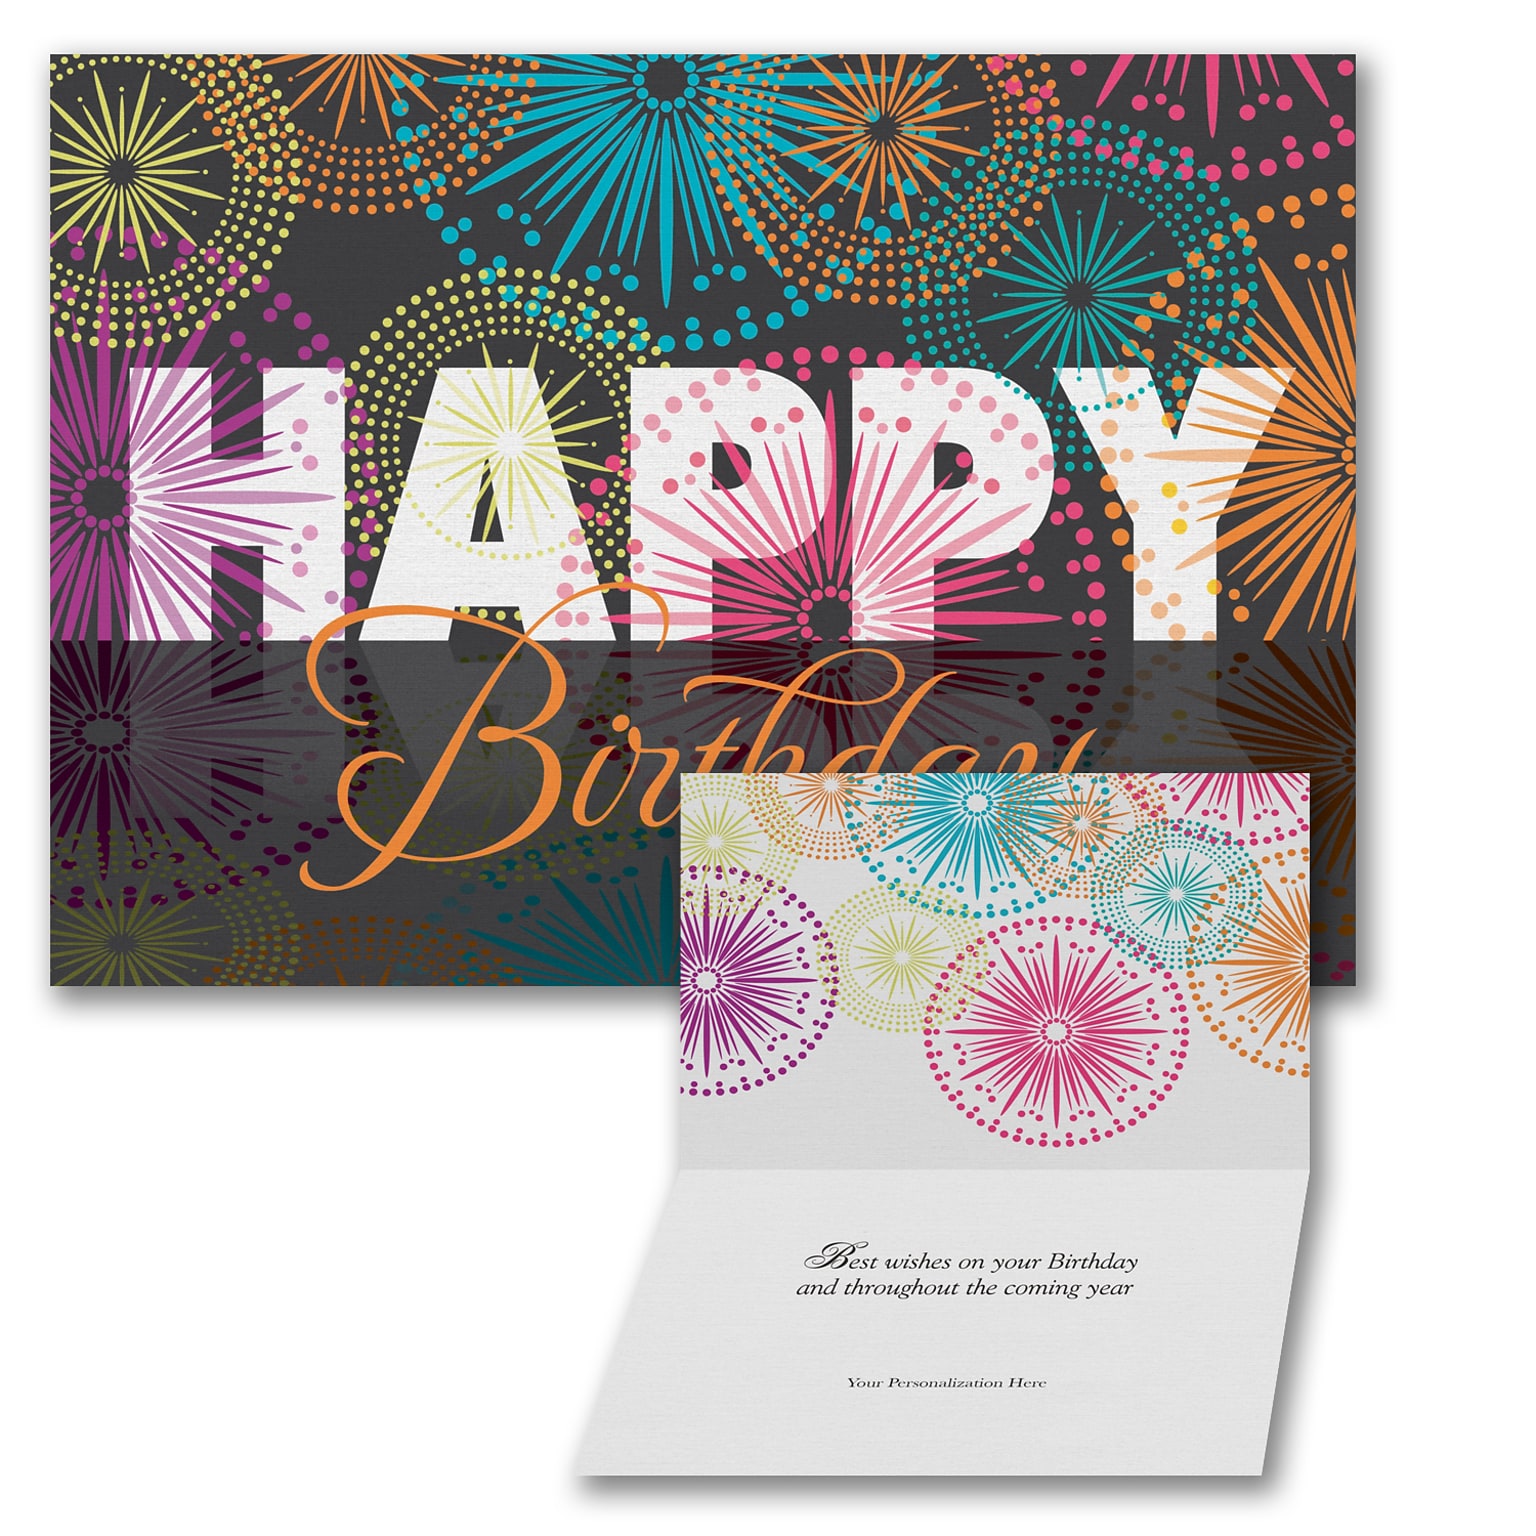 Custom Birthday Blow-Out Cards, With Envelopes, 7-7/8 x 5-5/8, 25 Cards per Set